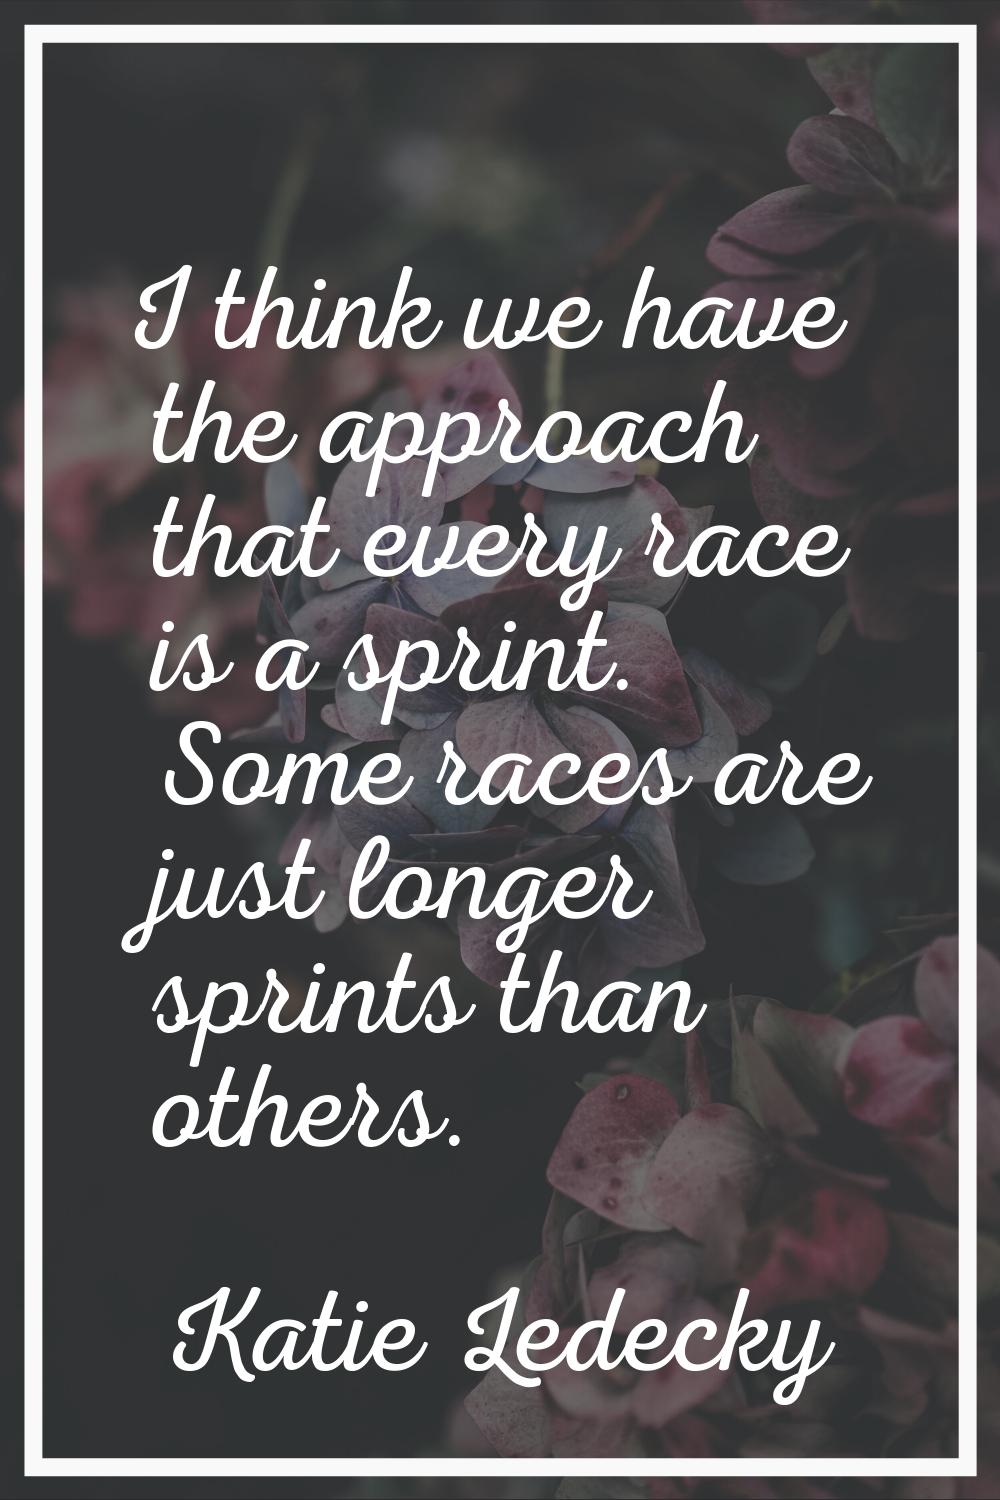 I think we have the approach that every race is a sprint. Some races are just longer sprints than o